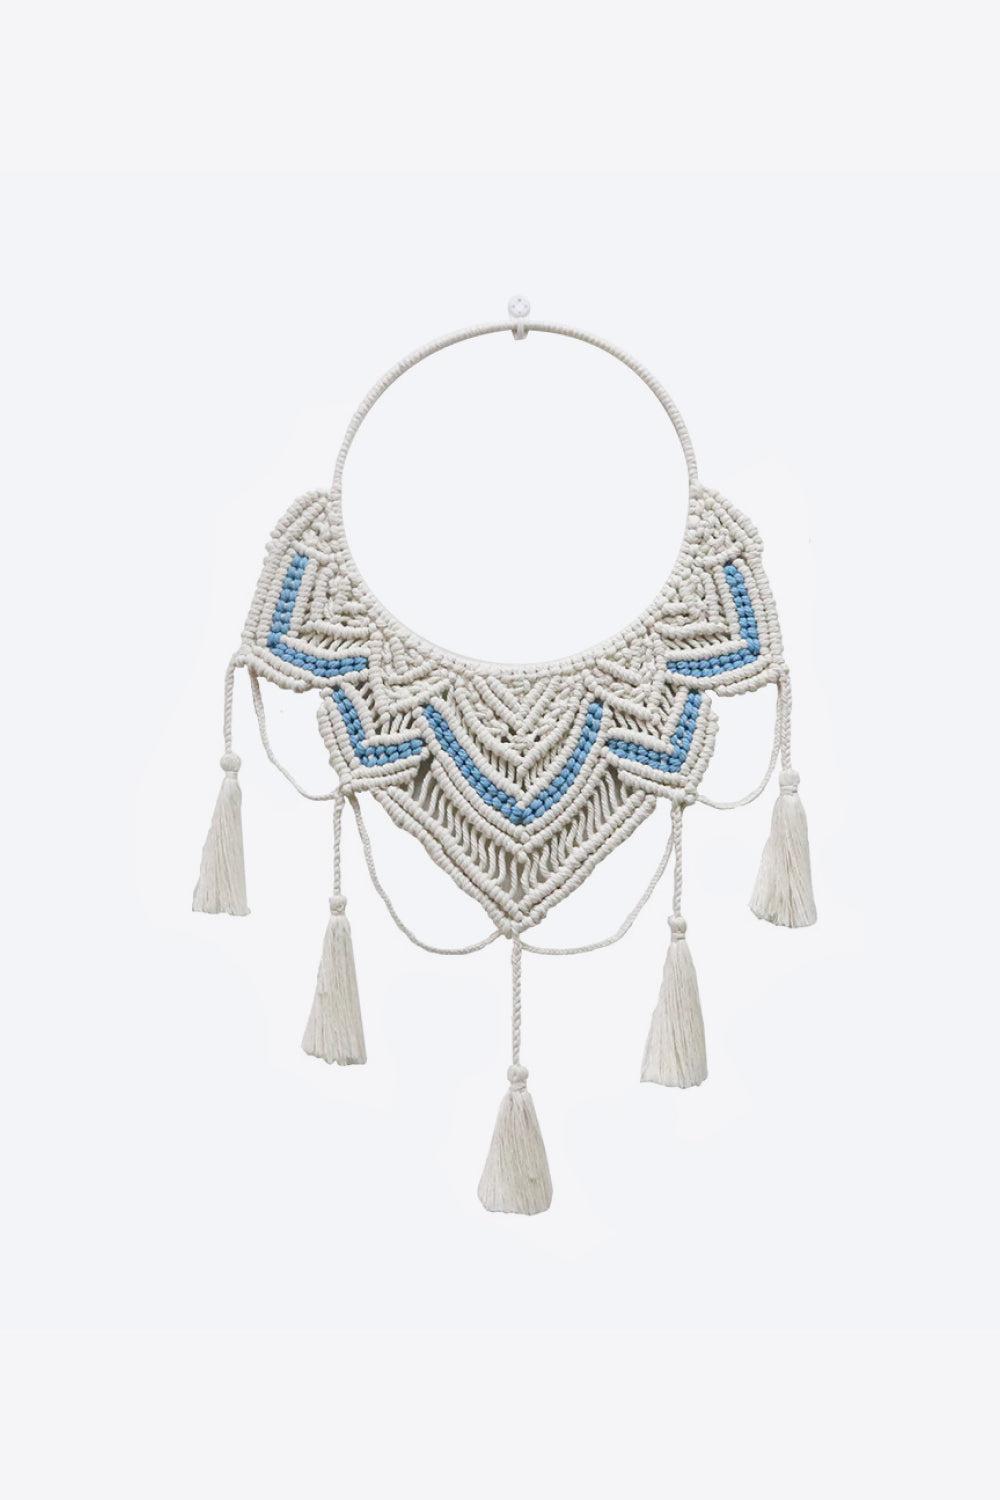 Macrame Wall Hanging with Tassel BLUE ZONE PLANET